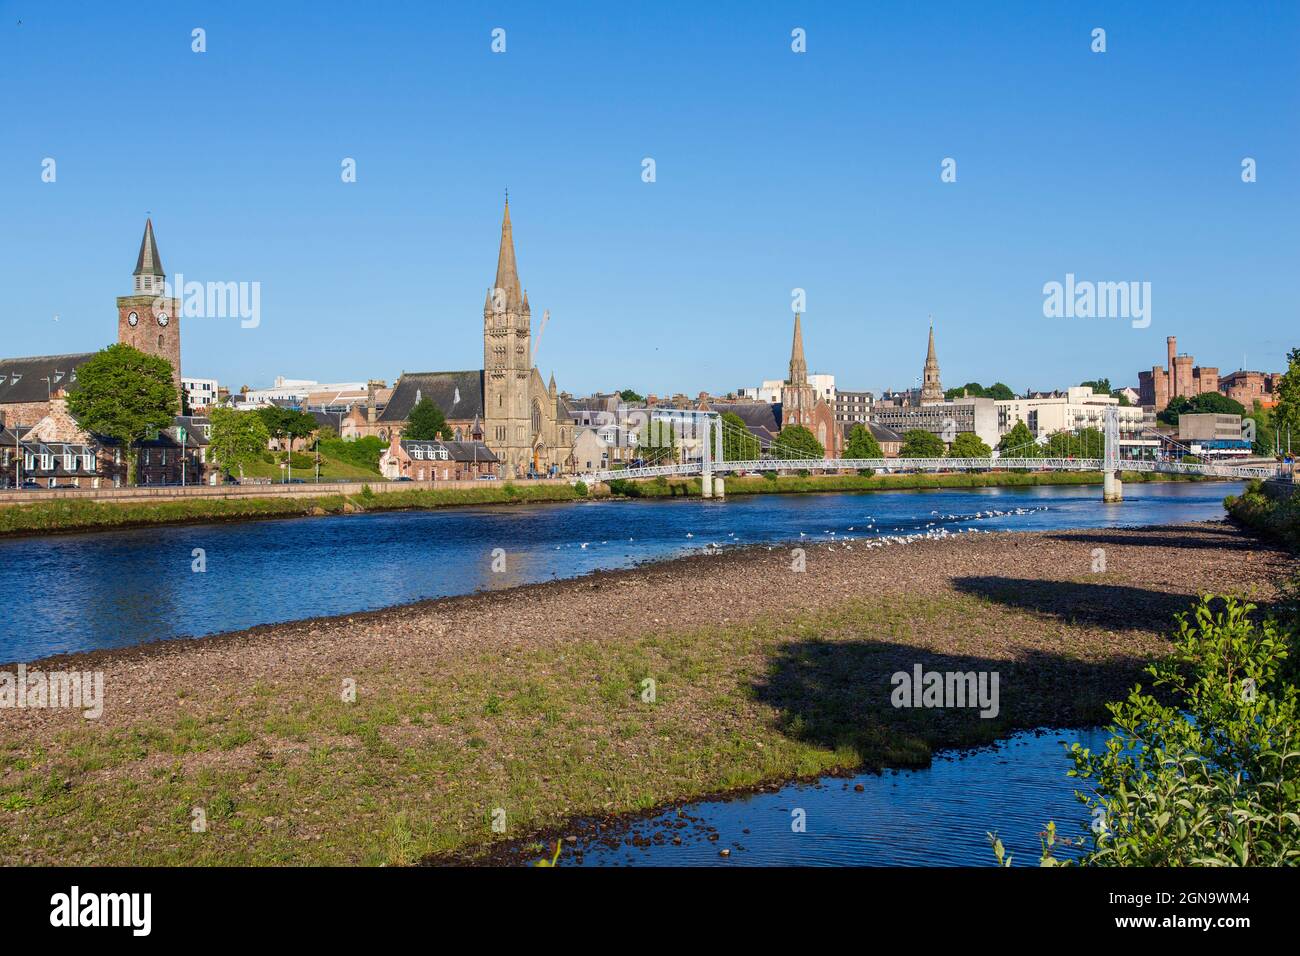 The city of Inverness on the banks of the River Ness, Highland, Scotland Stock Photo